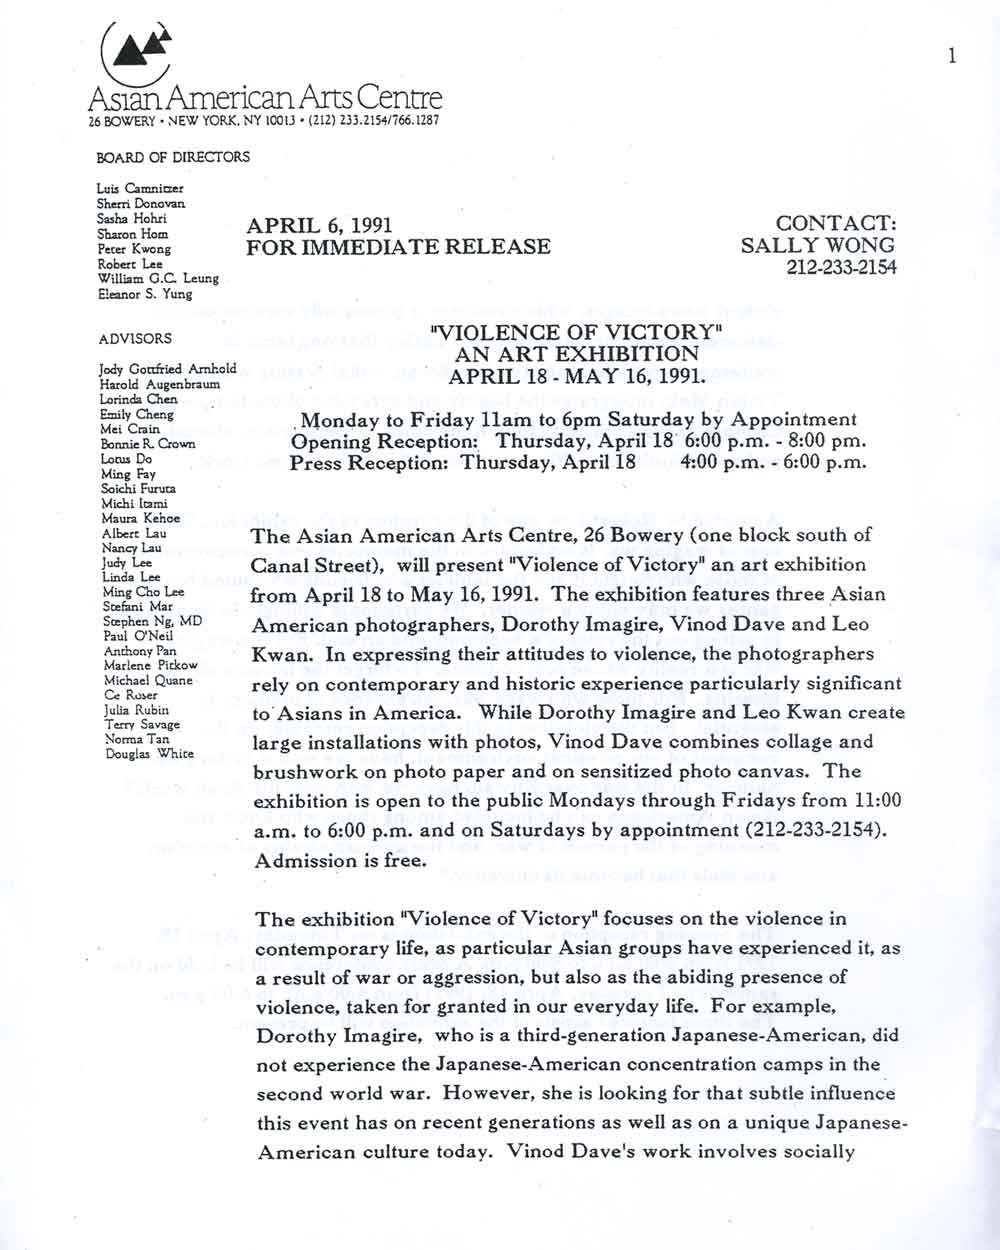 Victory of Violence press release, pg 1